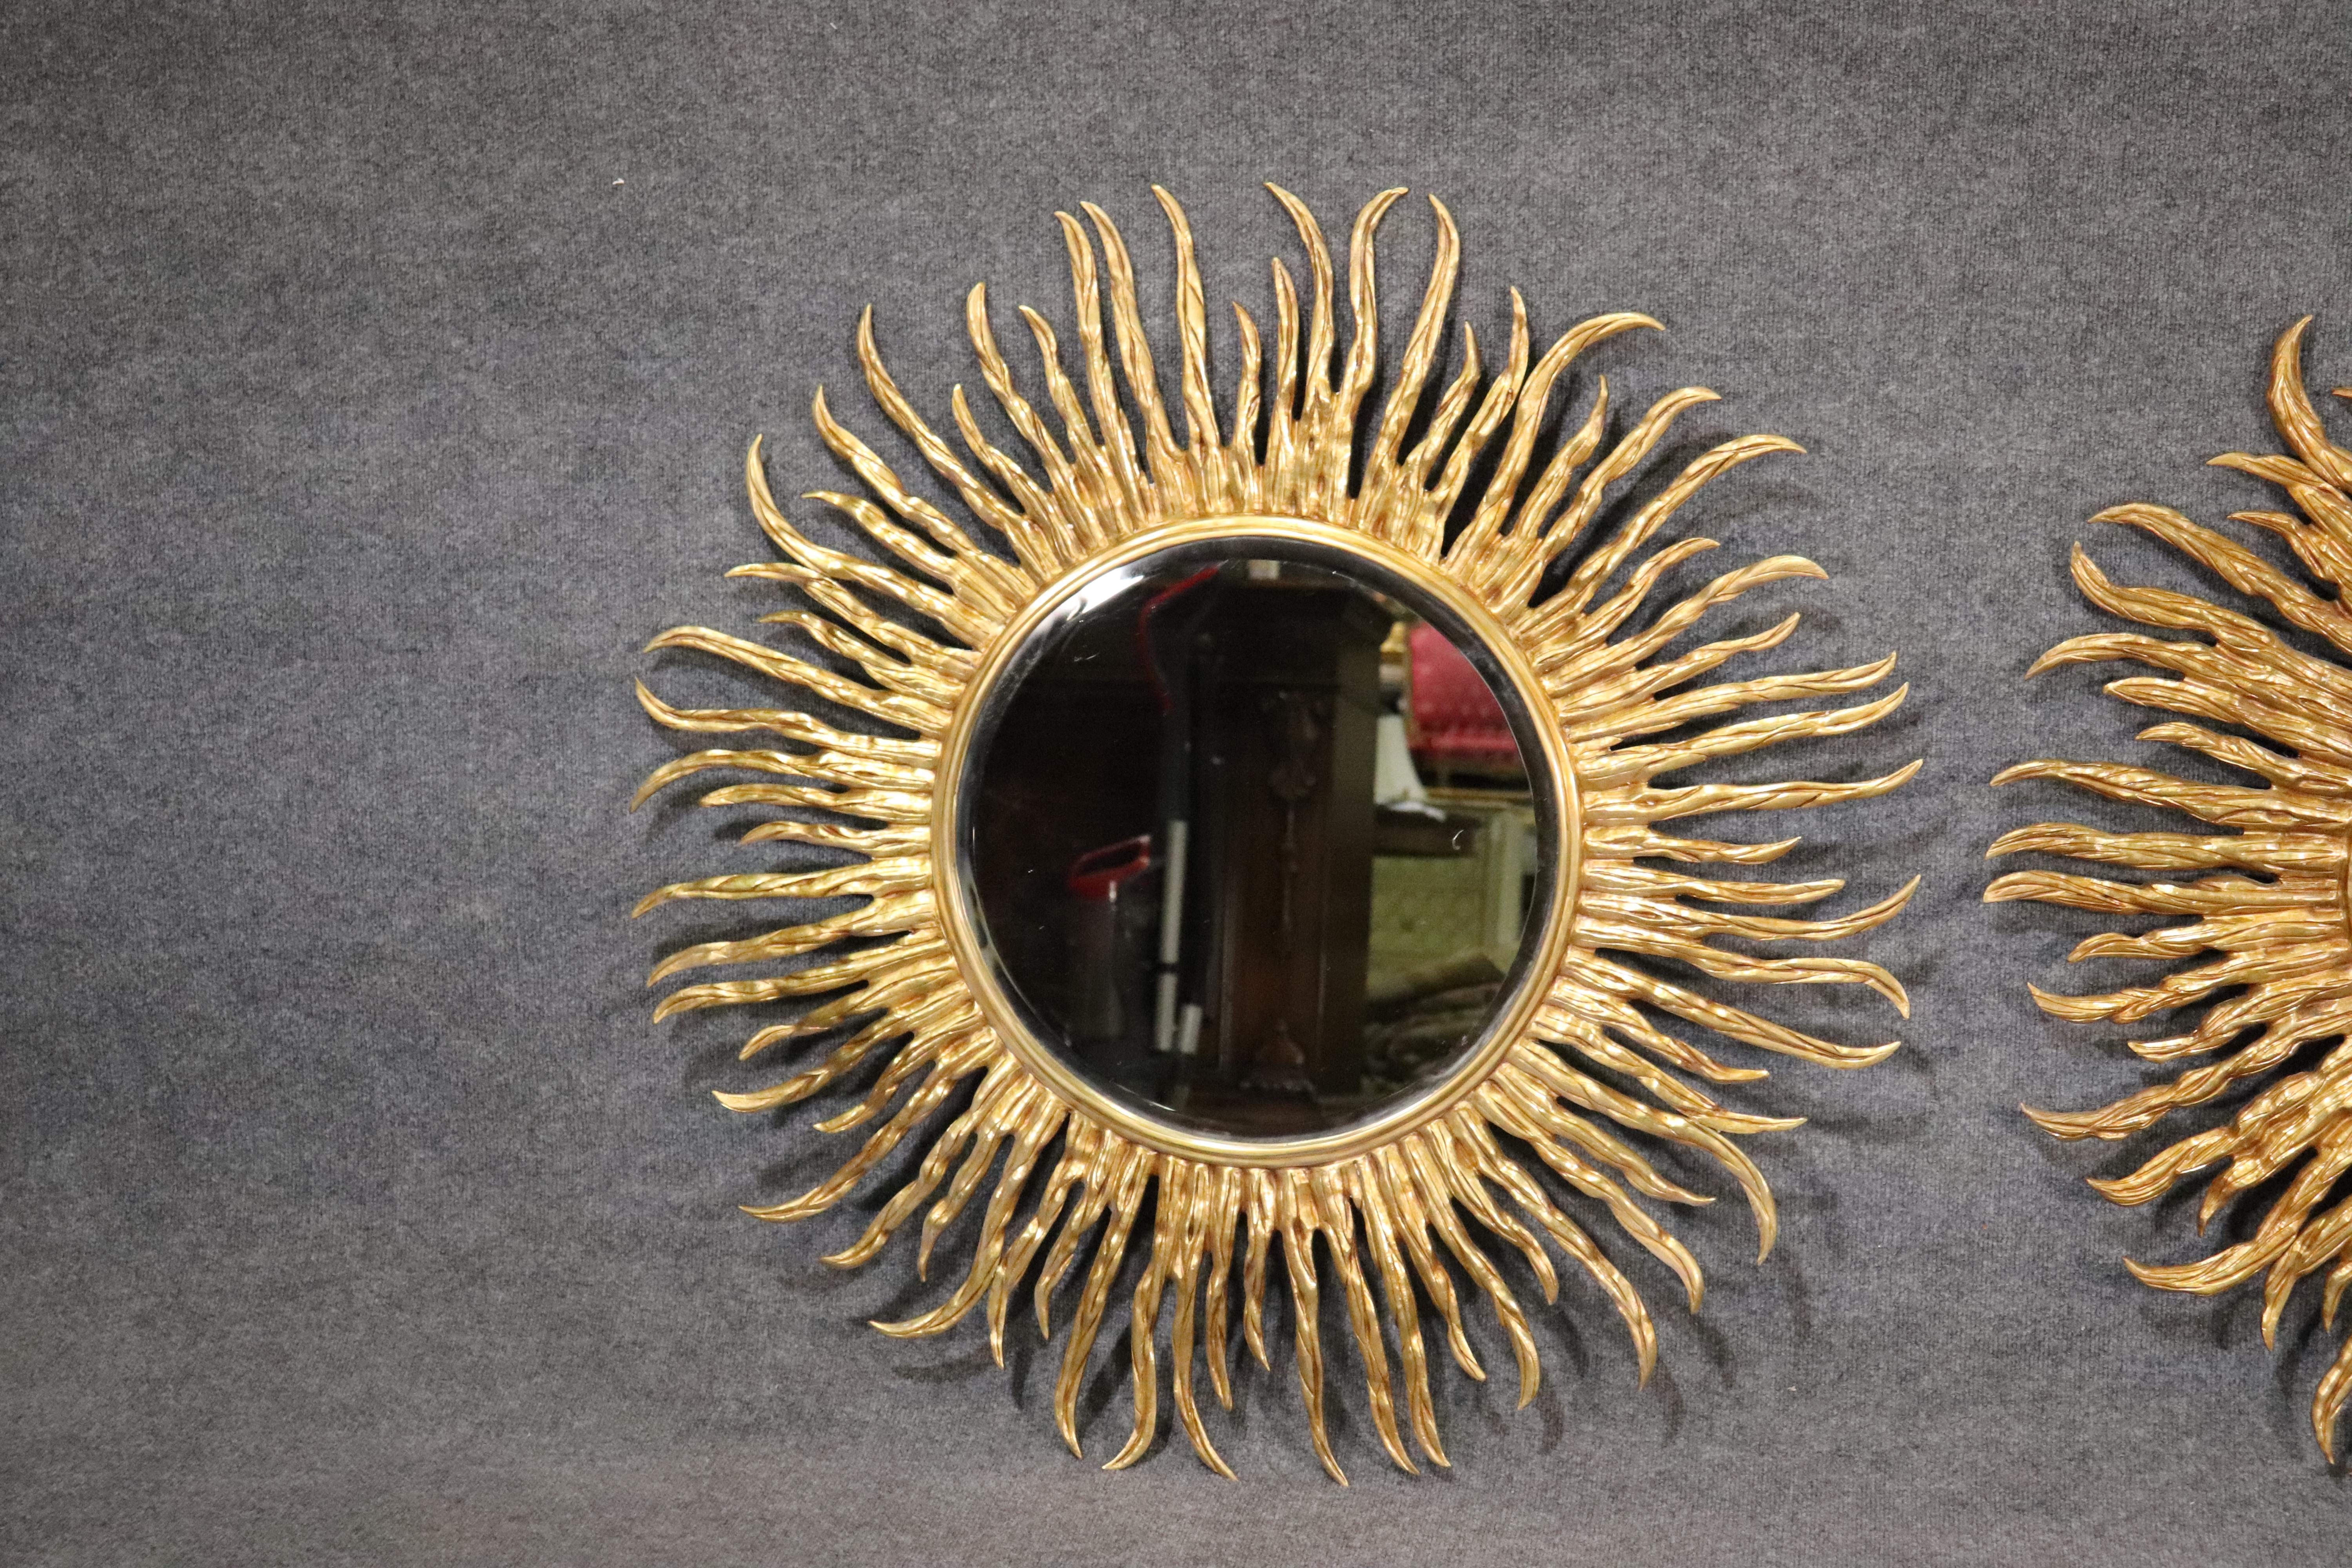 This is a listing for one. We can create a listing for a pair if desired. This is a rare solid bronze, extremely heavy and high quality starbust mirror. The mirror has a gorgeous beveled glass mirror and is polished and in mint condition. This is a